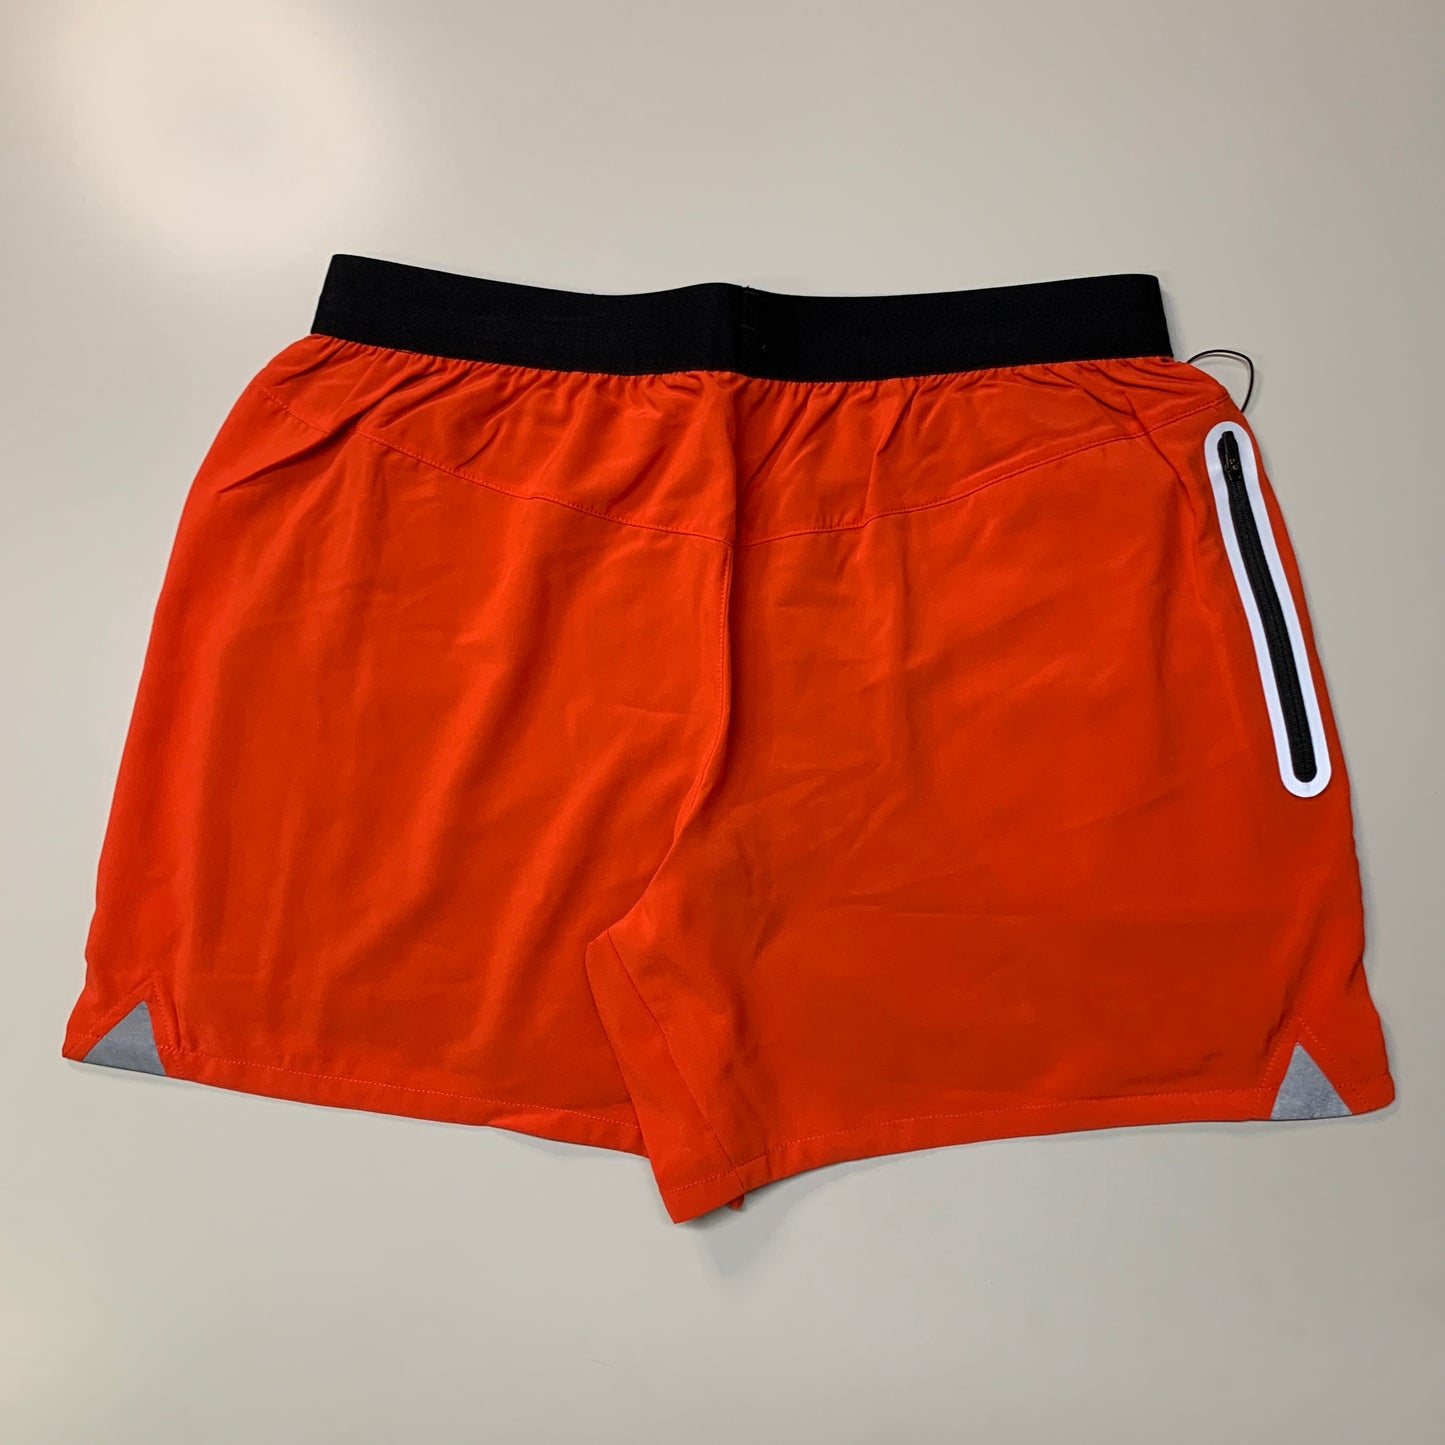 NATHAN Front Runner Shorts 5" Inseam Men's Fiery Red Size M NS70100-20126-M